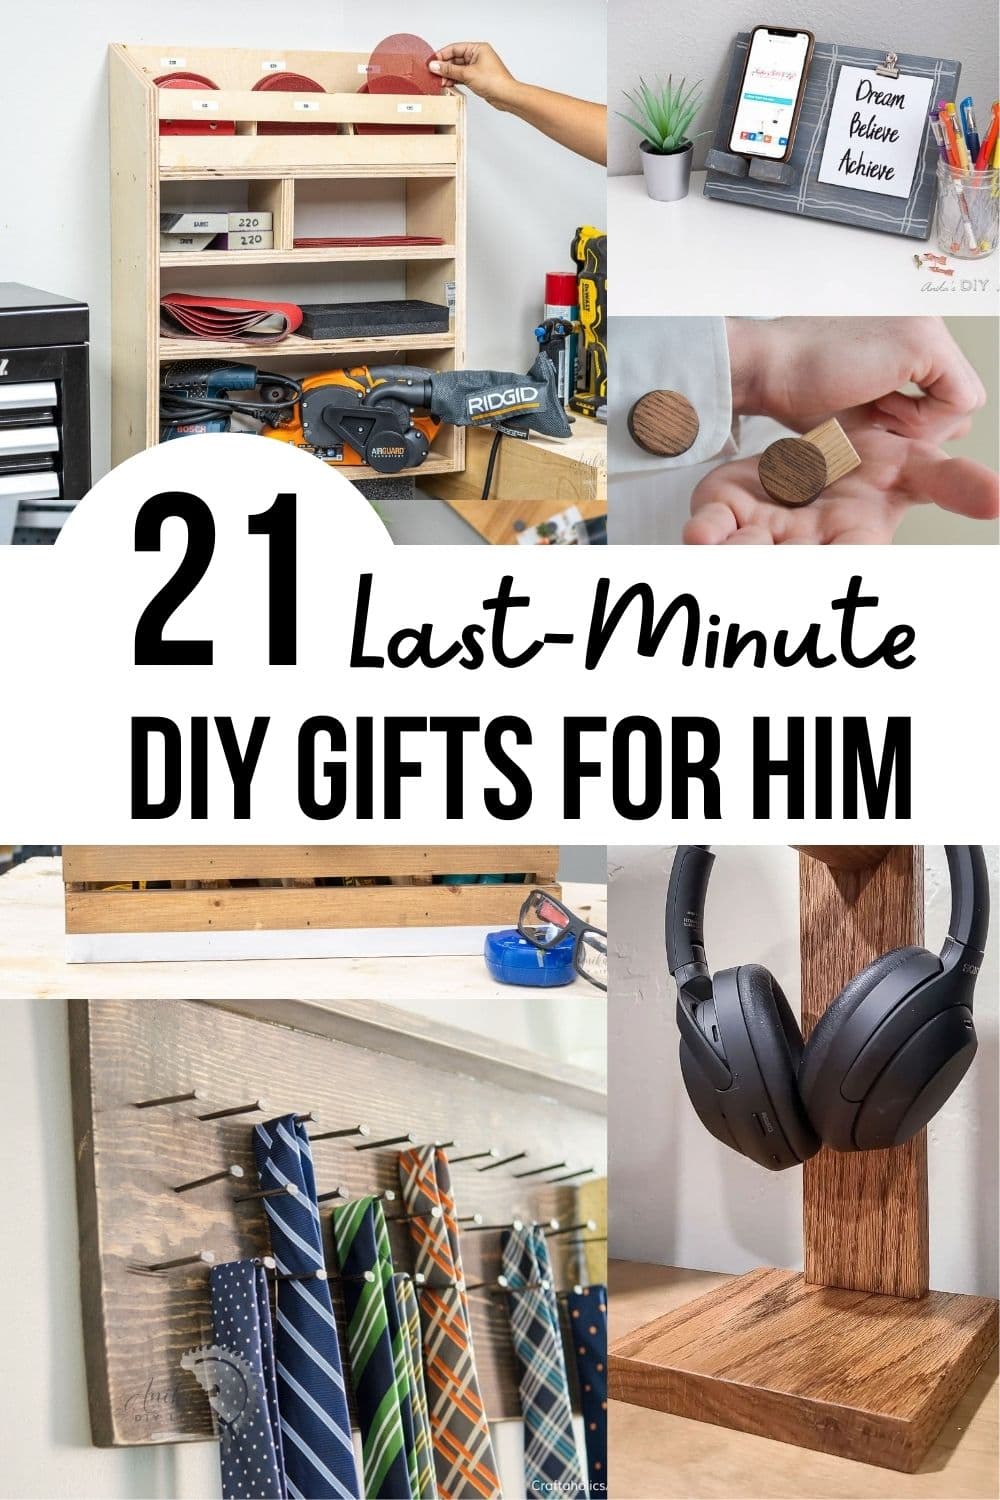 Image collage of 7 DIY gifts for him with text overlay